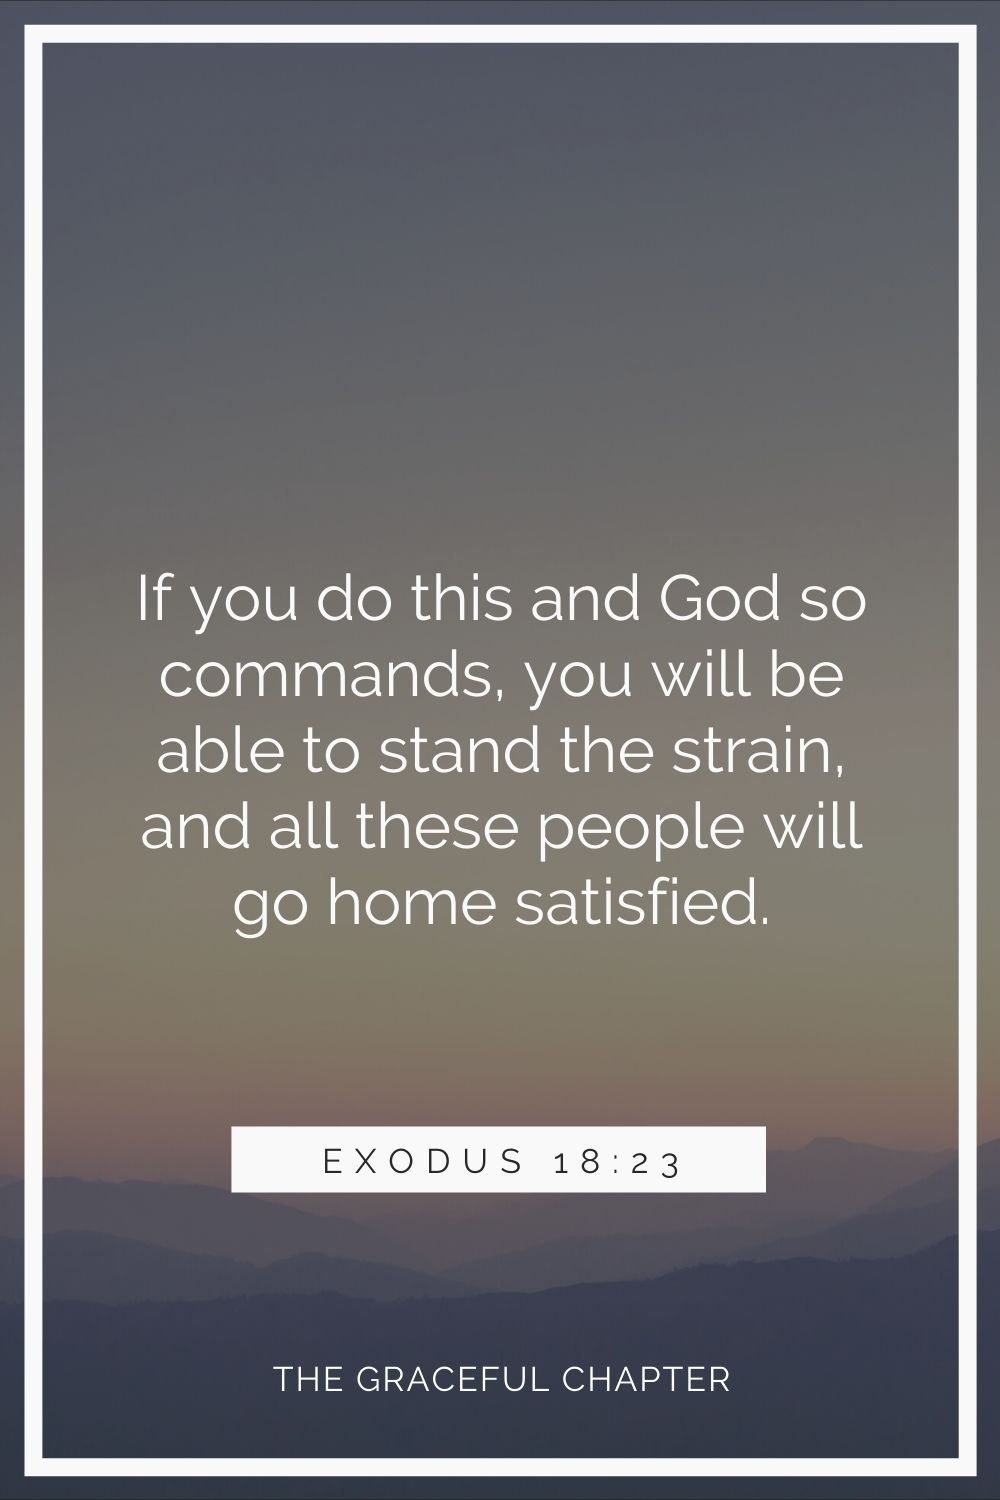 If you do this and God so commands, you will be able to stand the strain, and all these people will go home satisfied.” Exodus 18:23